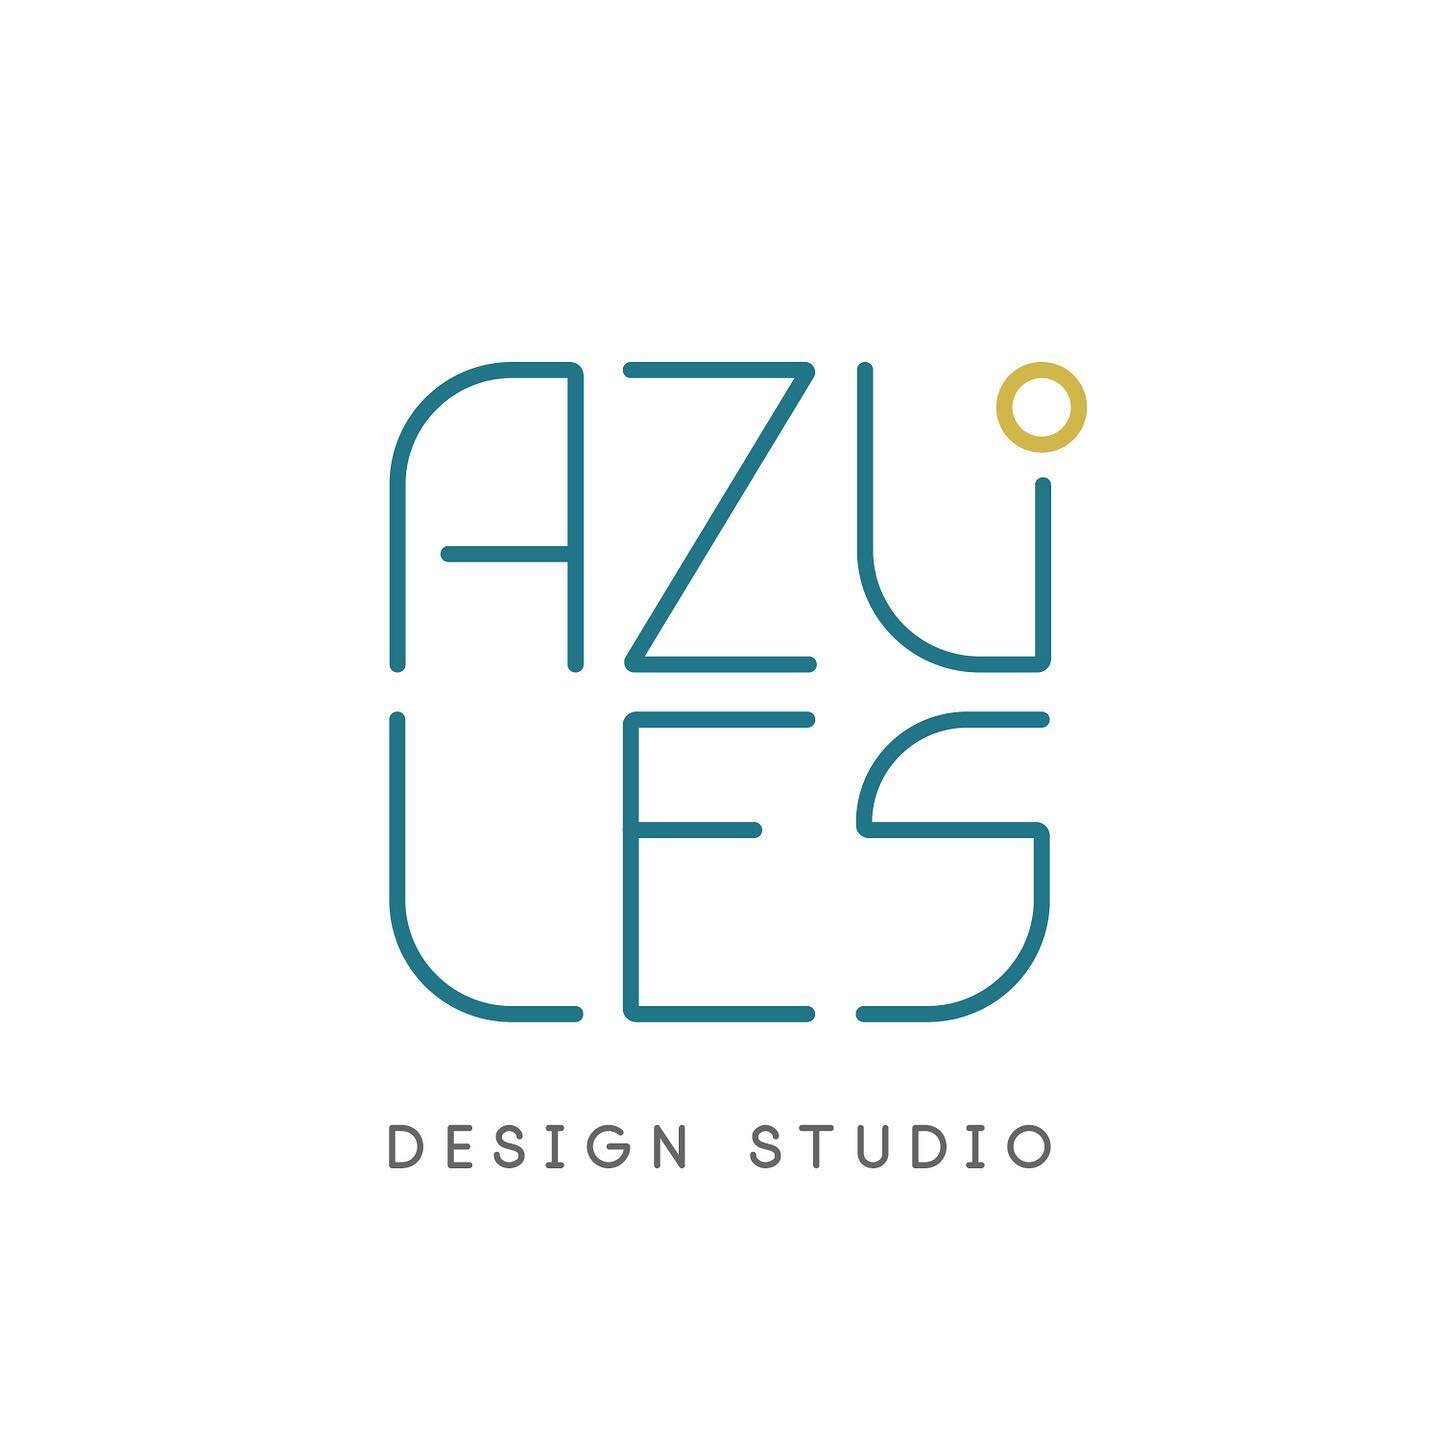 Hola amigas y amigos! Welcome to Azules Design Studio! 

We are a team dedicated to celebrating the beauty of culture and our collective humanity through art, design and authentic storytelling.

We are excited to continue evolving and sharing all the